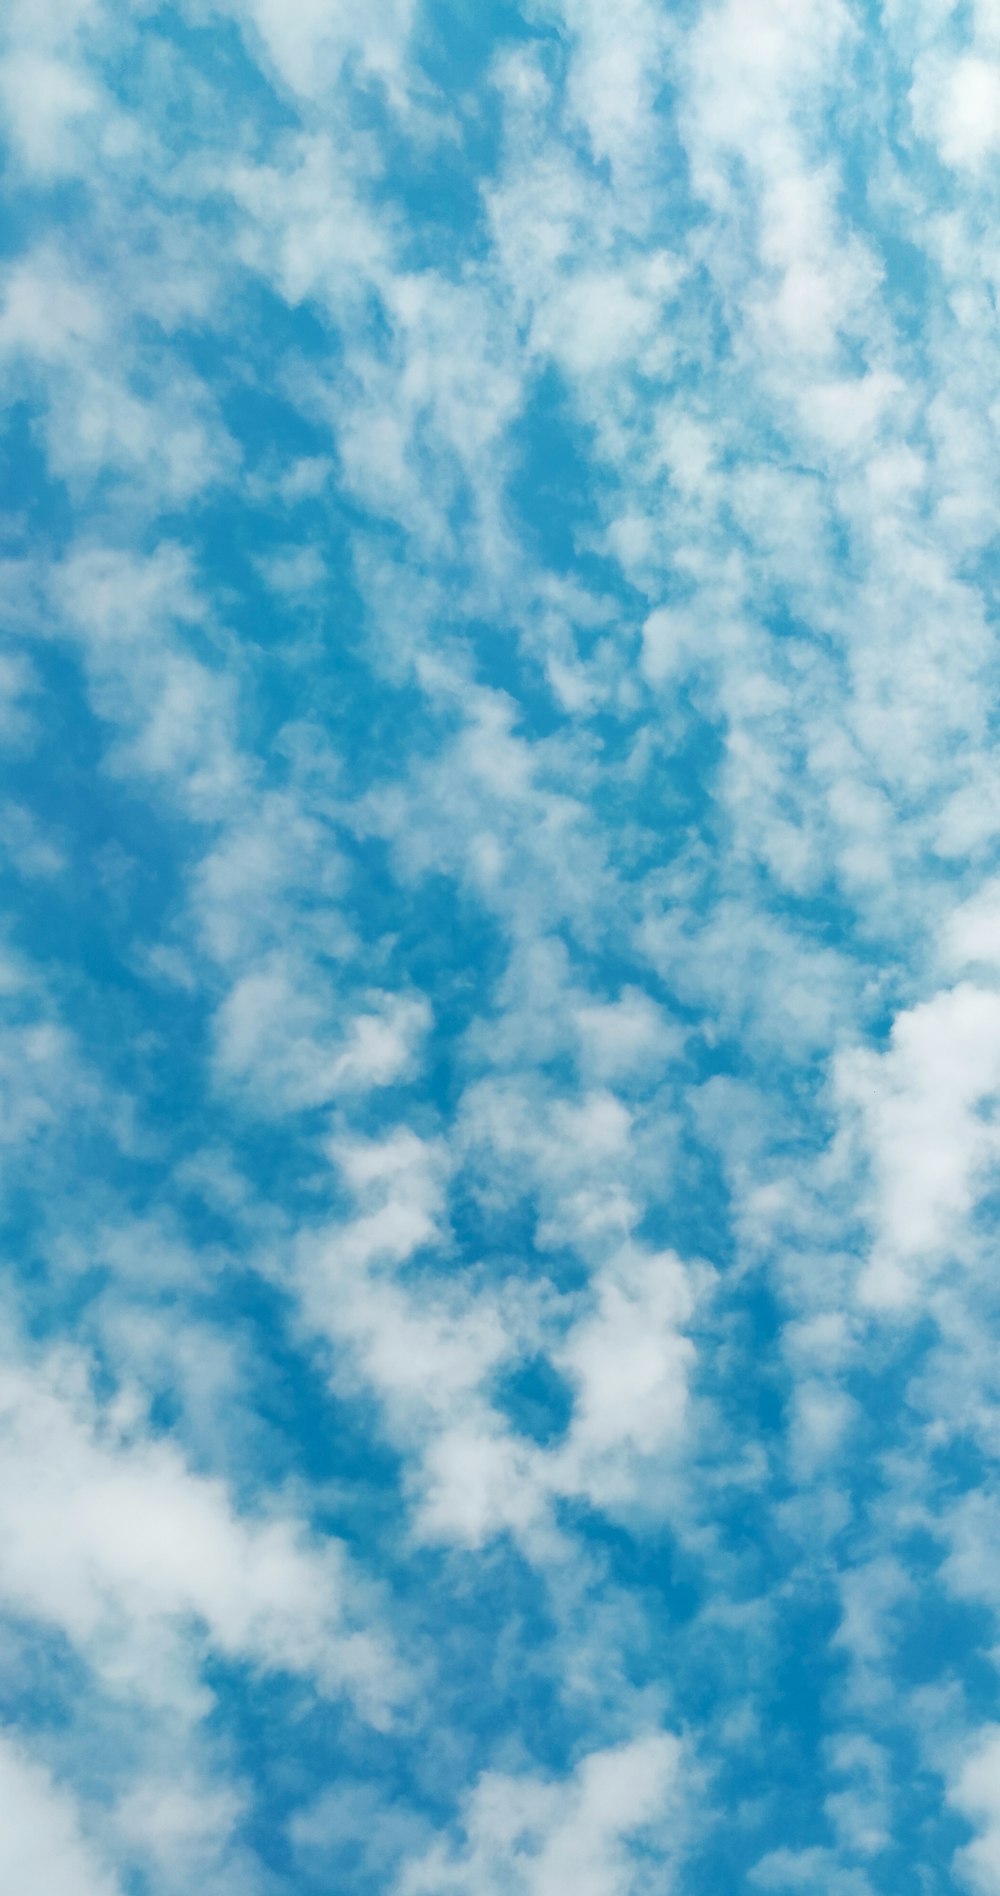 blue sky with white clouds photo – Free Wallpaper Image on Unsplash